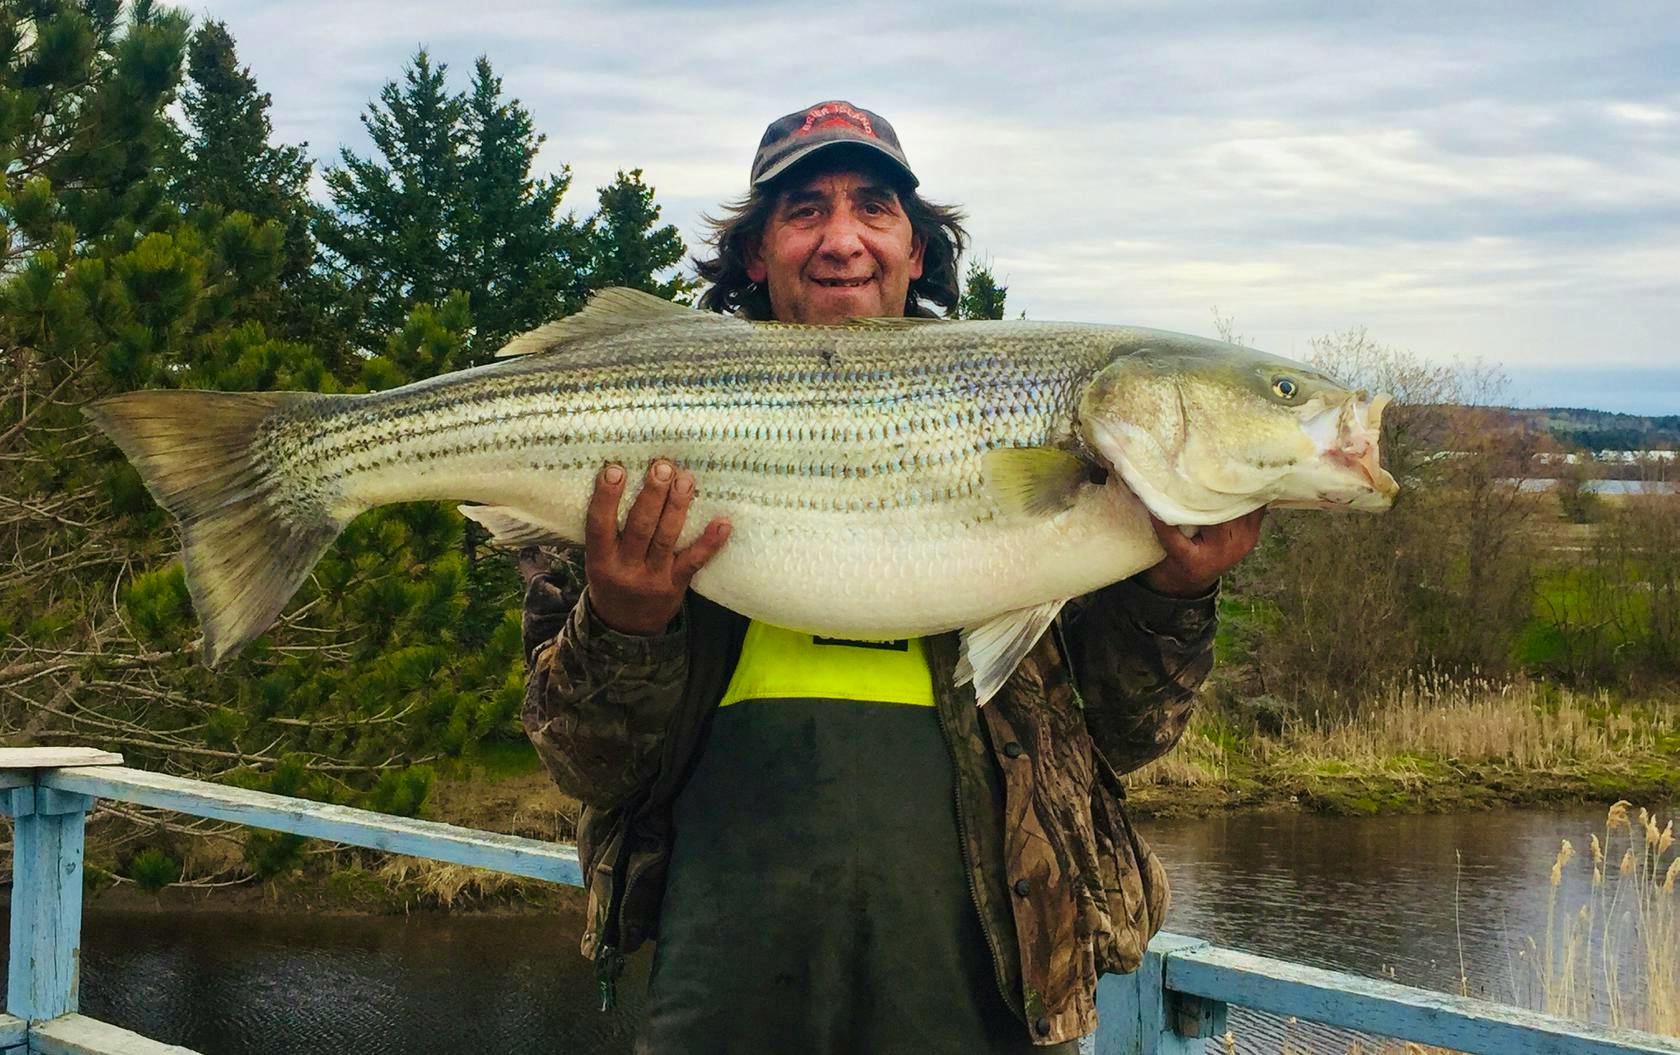 All about that bass: Nova Scotia man hooks monster fish in Annapolis River  after tidal station shutdown